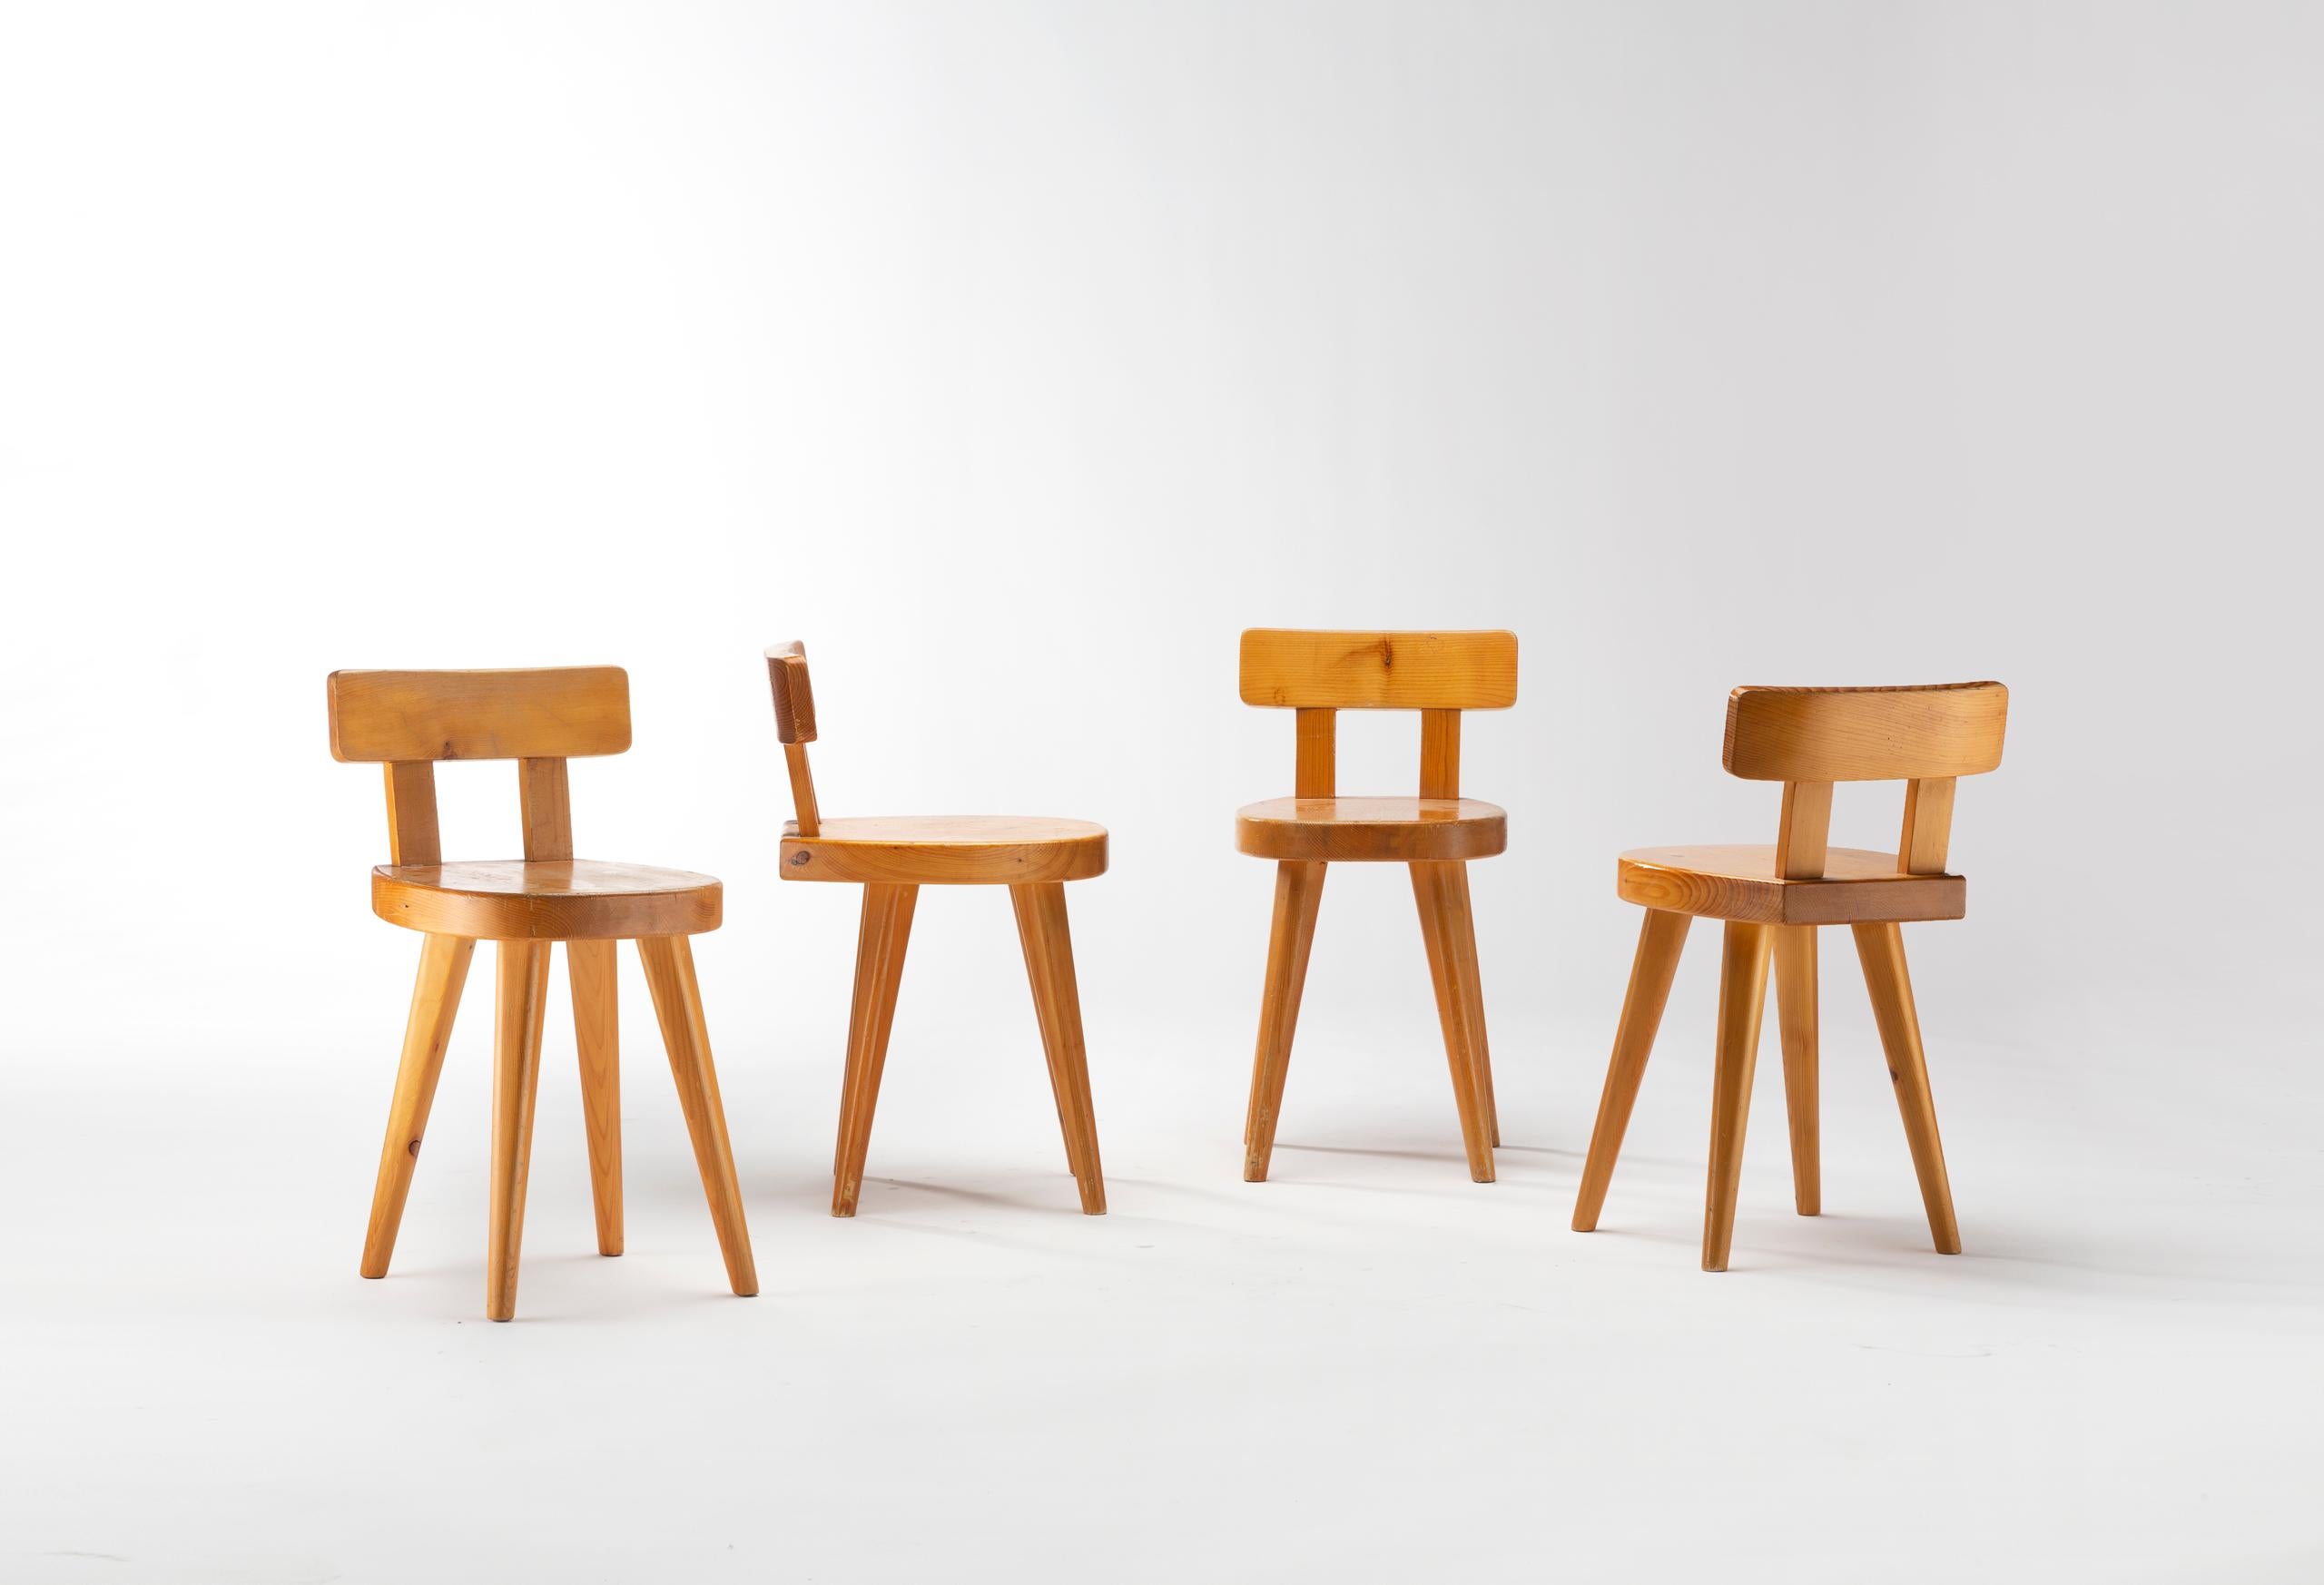 A set of four “Meribel” chairs by the French designer Christian Durupt 
Beech
Model designed for the ski resort station Meribel (France) on which he worked with Charlotte Perriand (1903-1999)
circa 1950-1960.